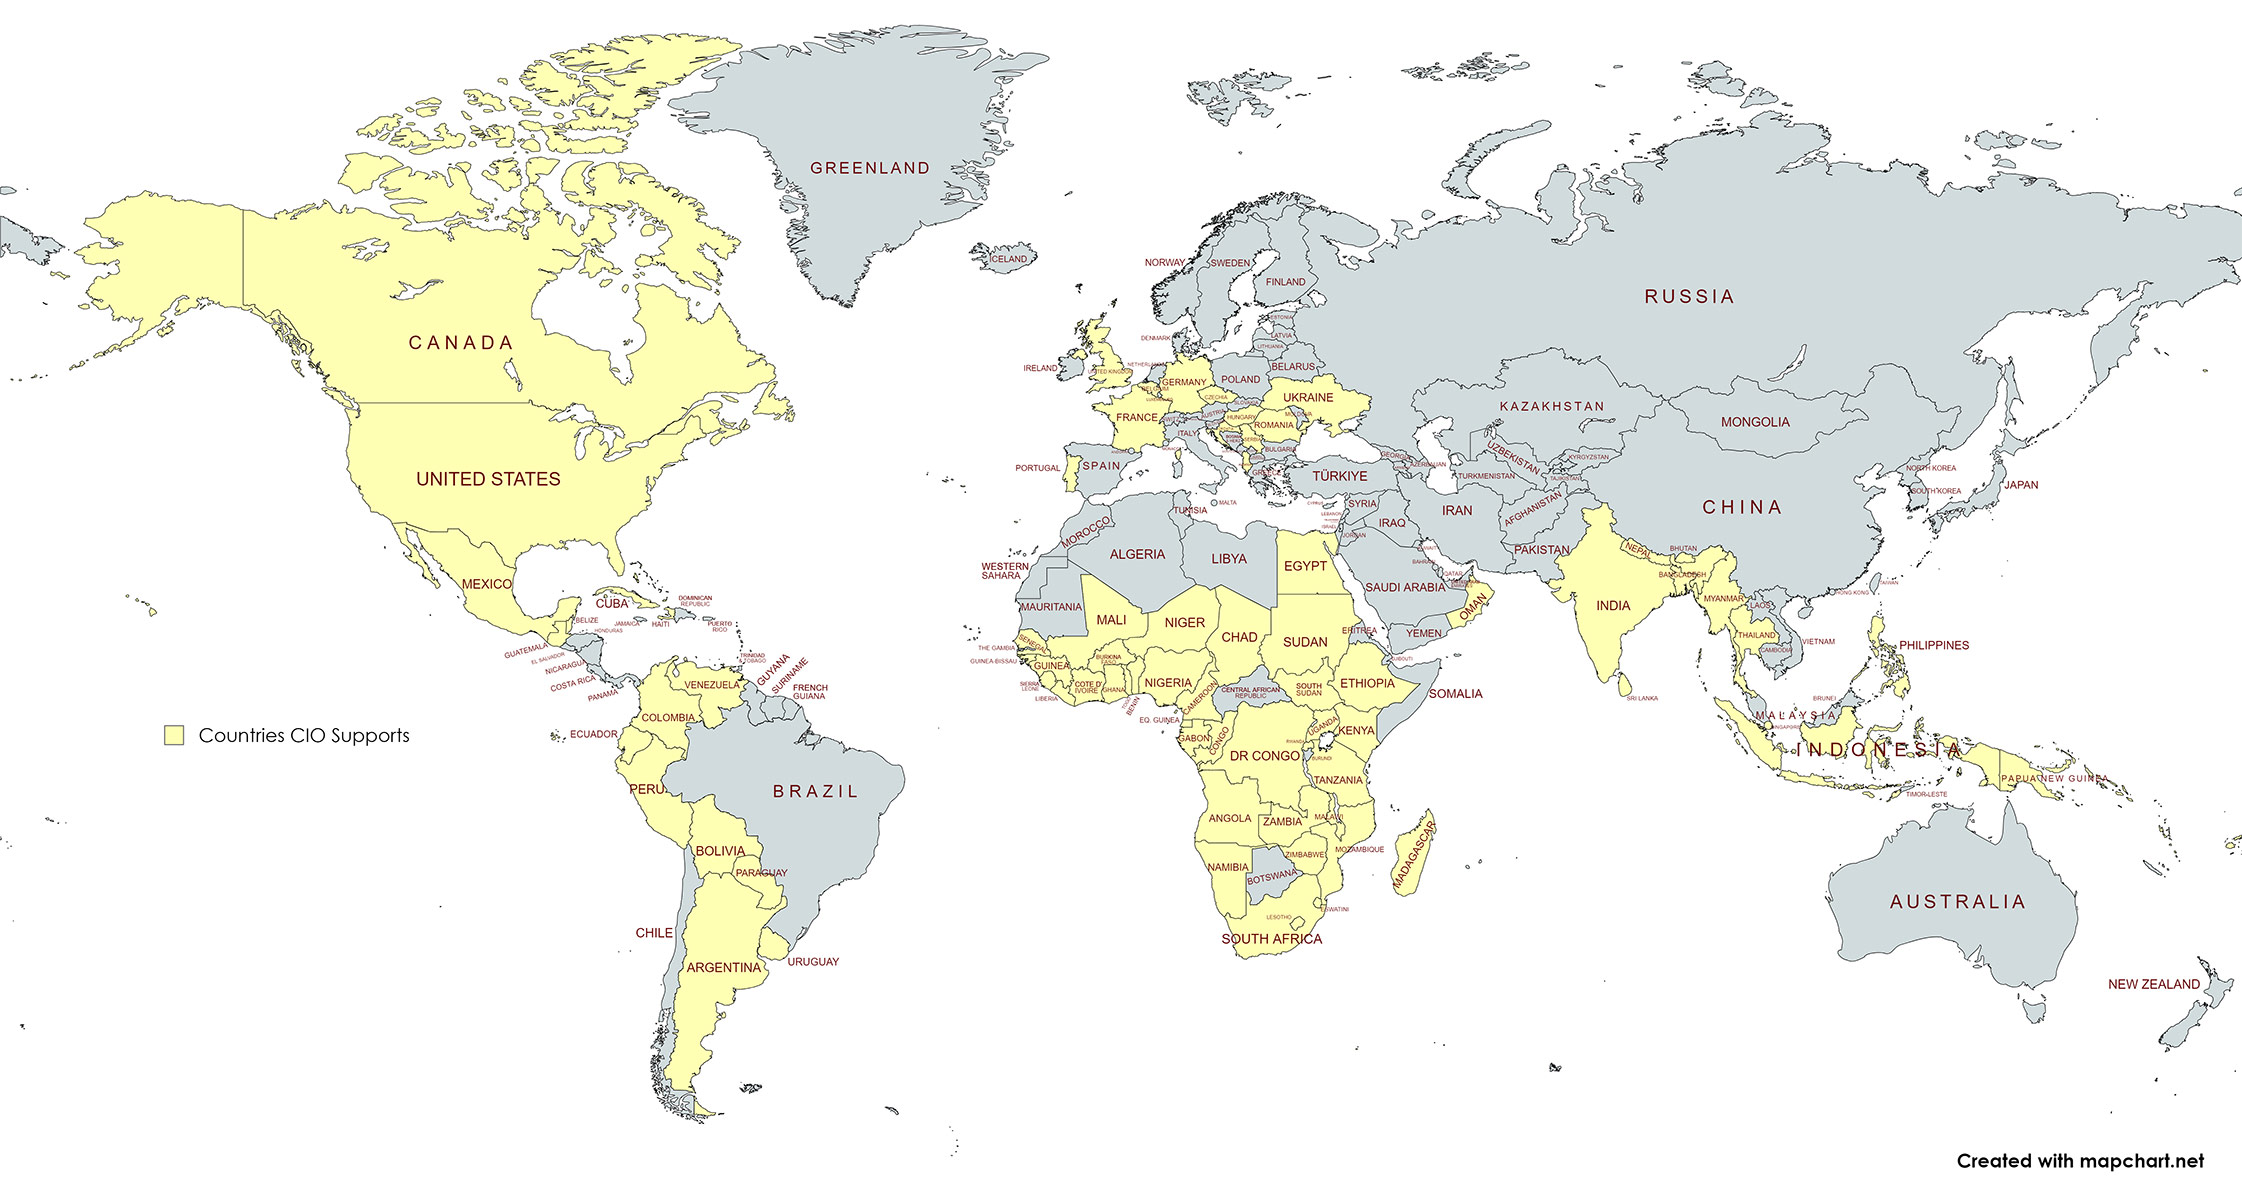 CIO Map of Countries